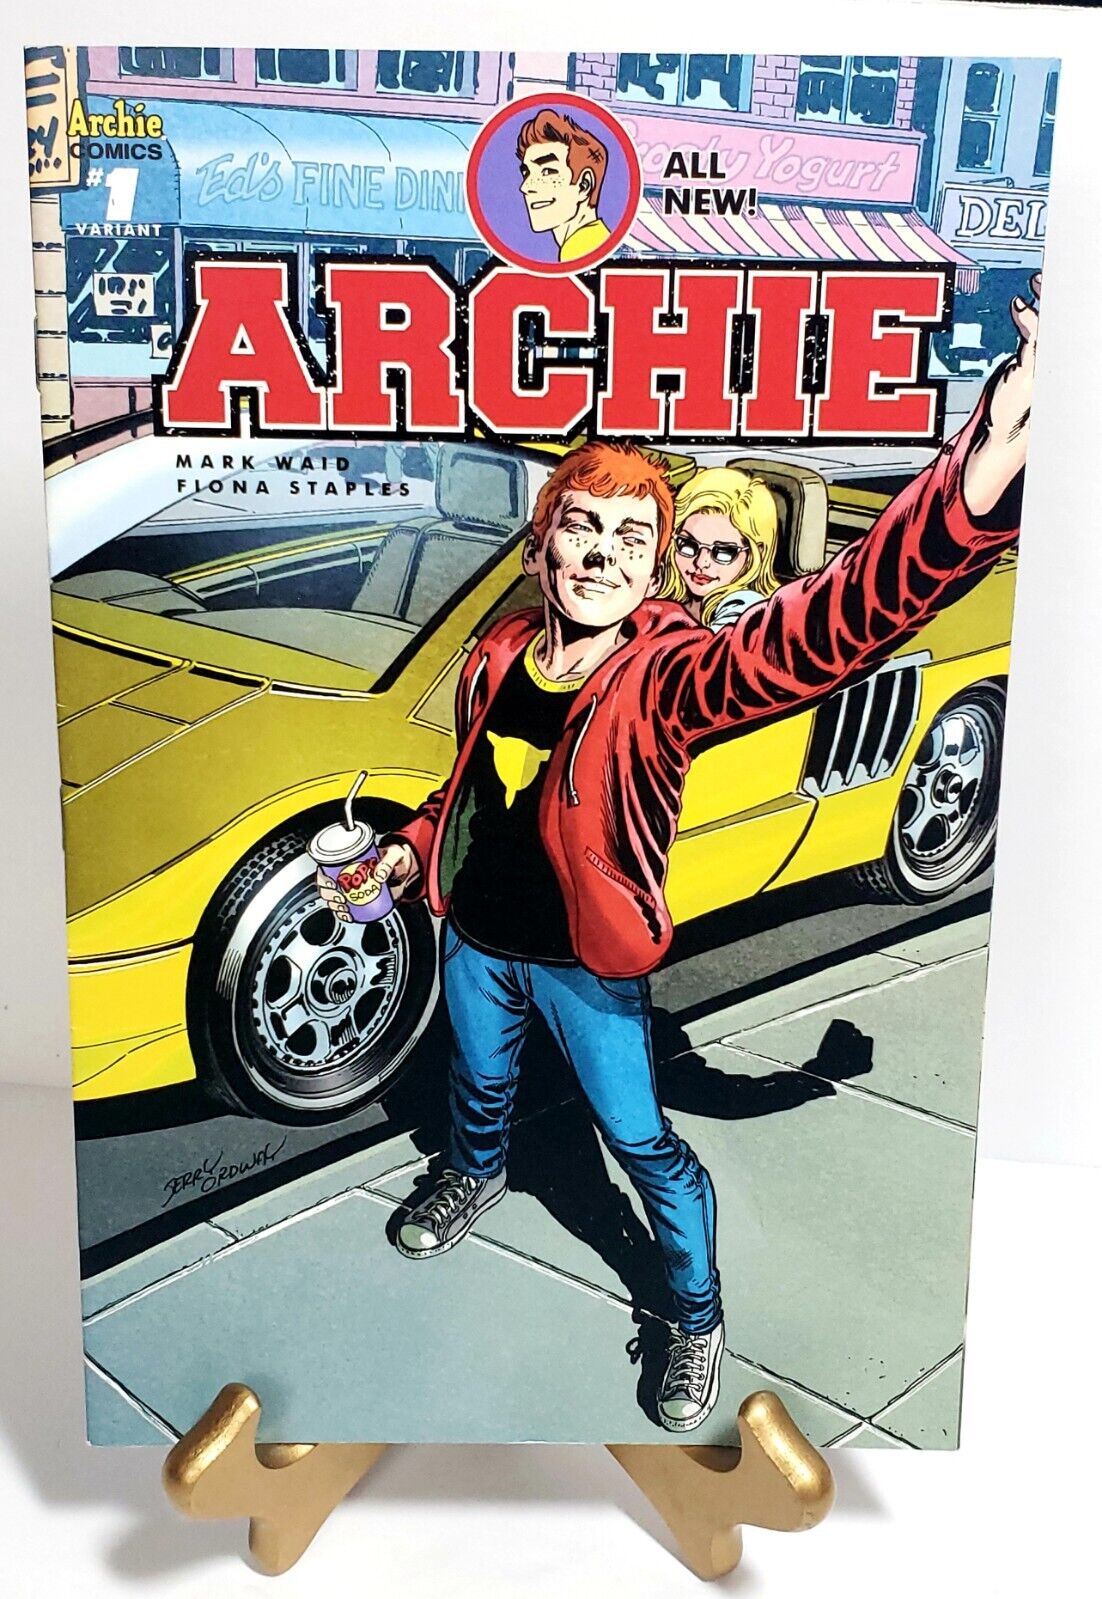 ARCHIE  #1  1ST PRINT   2015  JERRY ORDWAY VARIANT COVER   NOS   VF/NM OR BETTER